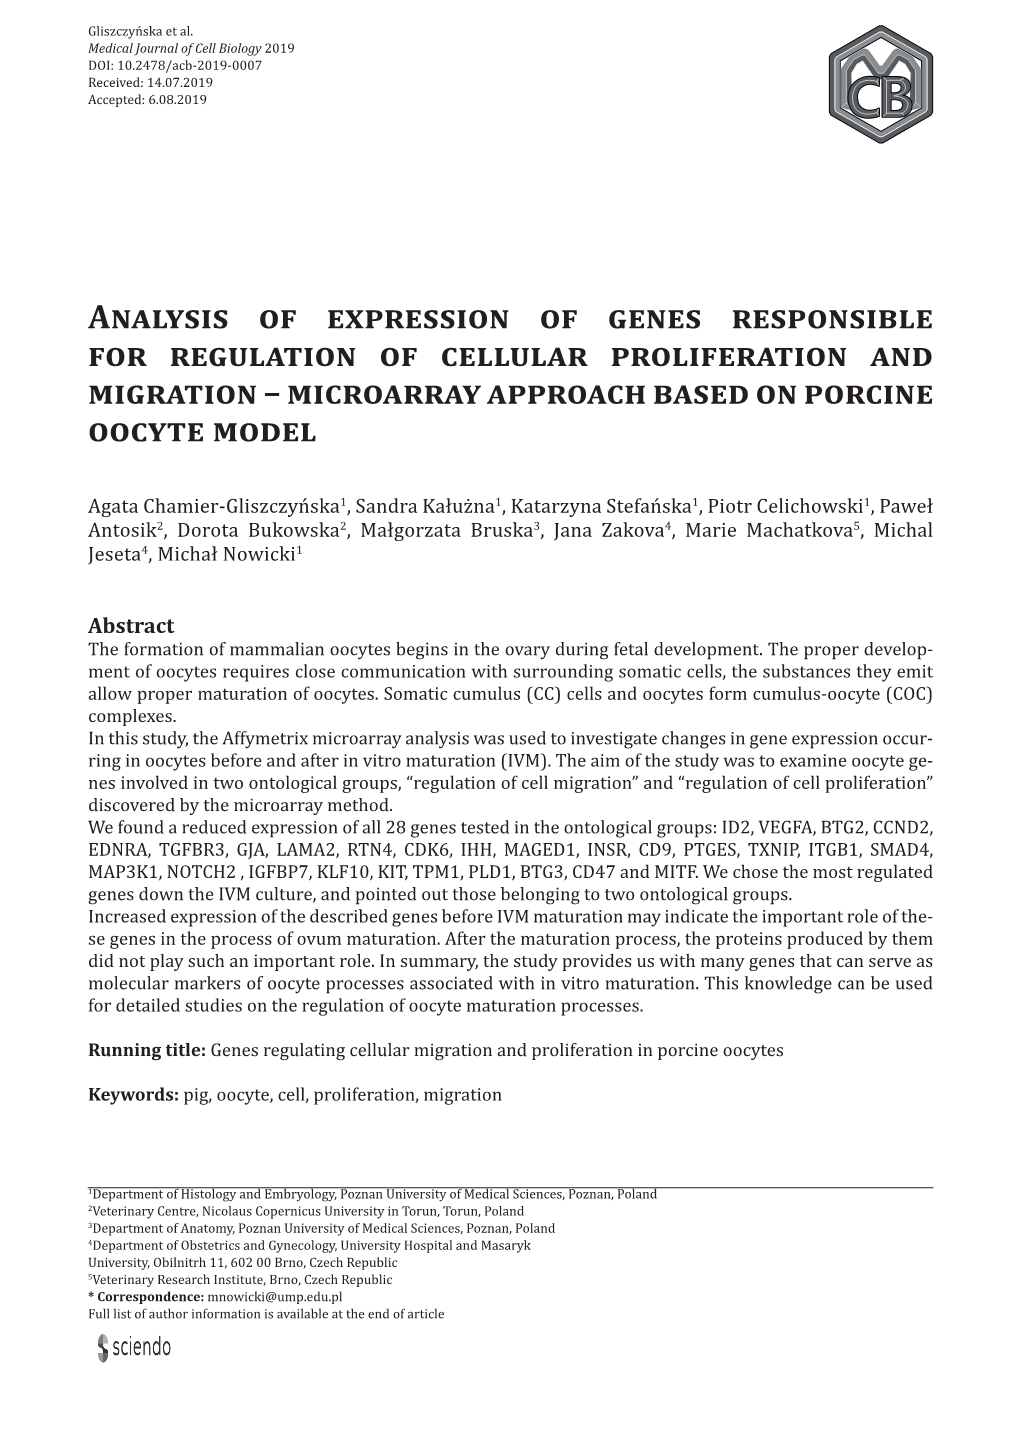 Analysis of Expression of Genes Responsible for Regulation of Cellular Proliferation and Migration – Microarray Approach Based on Porcine Oocyte Model